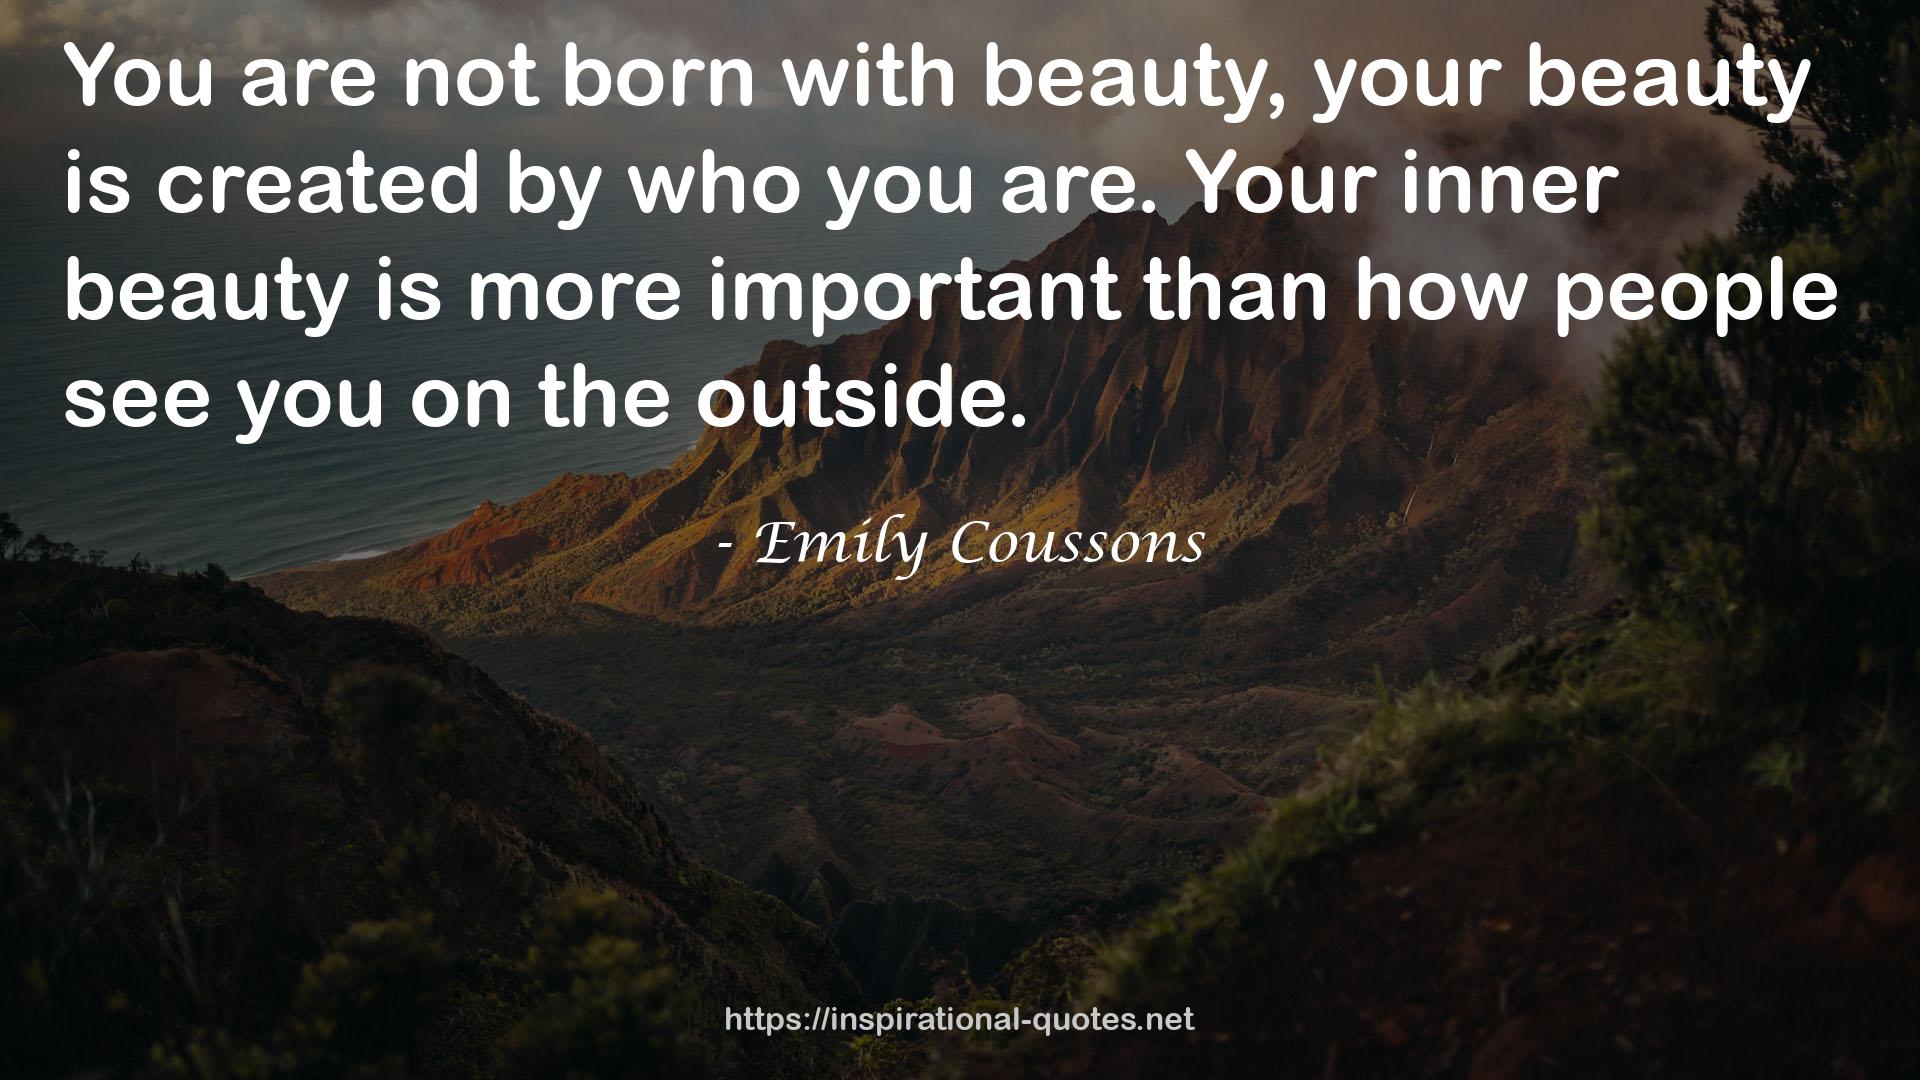 Emily Coussons QUOTES